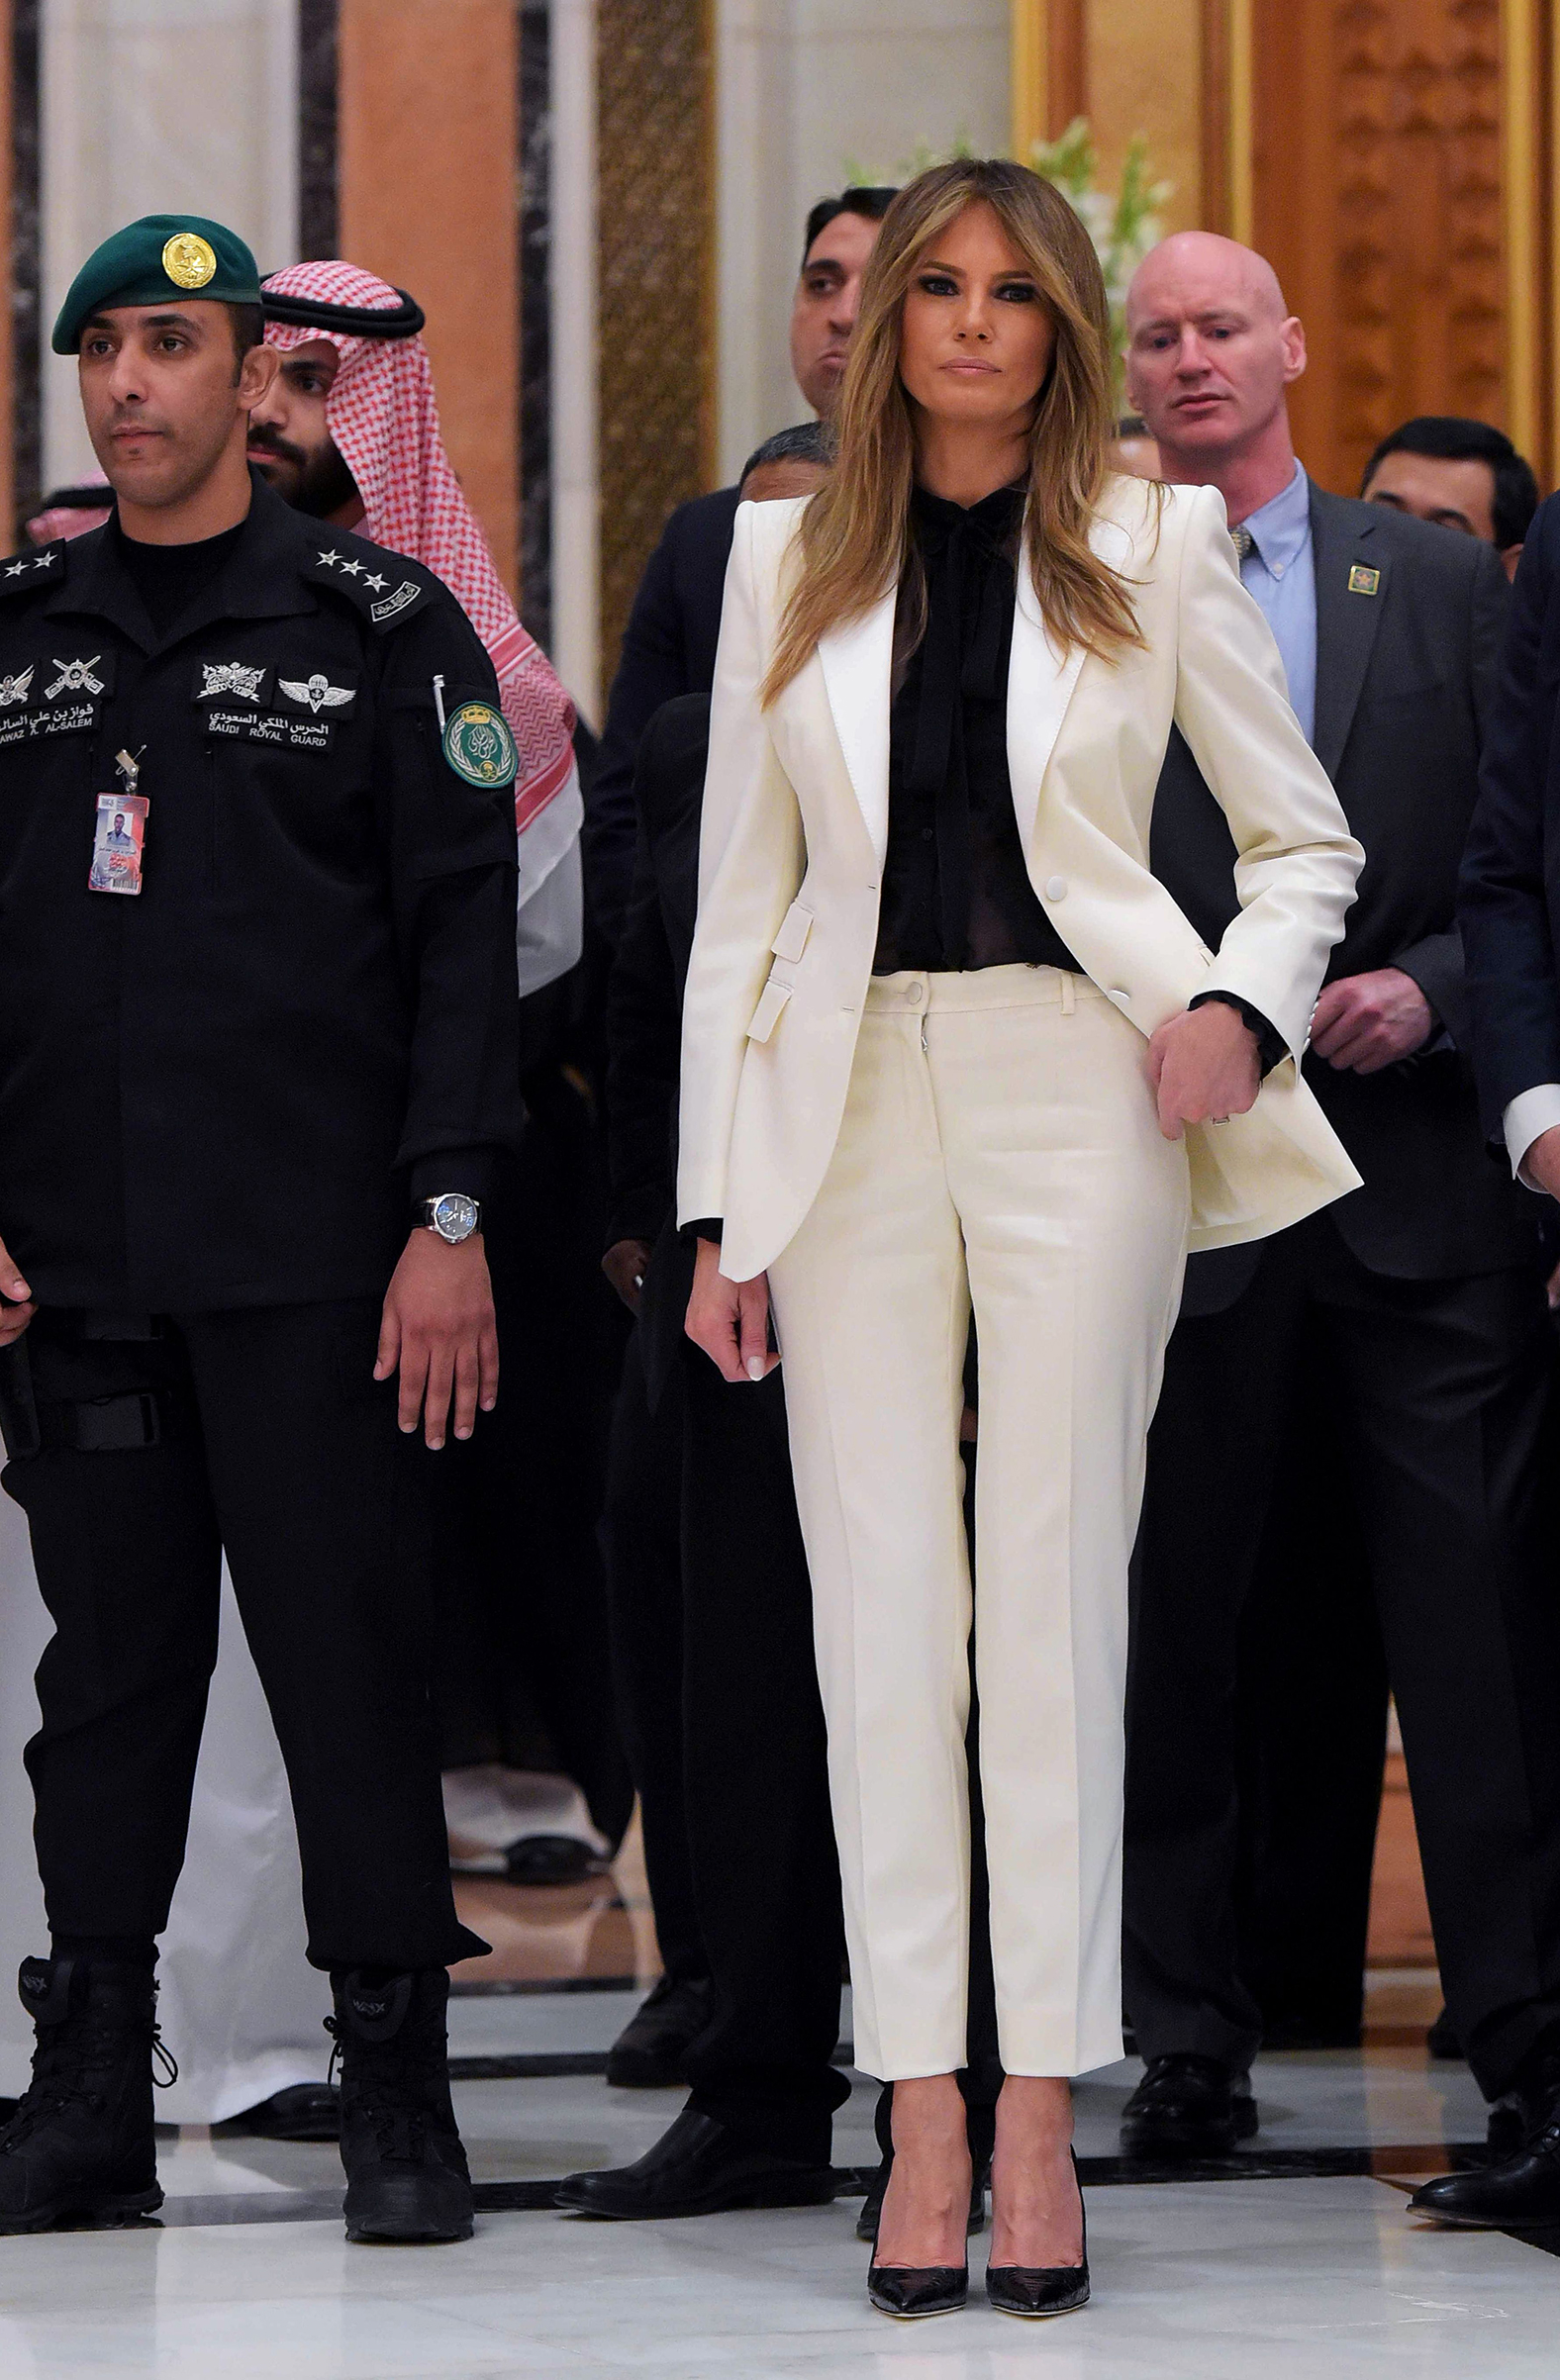 First lady Melania Trump wearing a cream Dolce & Gabbana suit, ahead of the Arab Islamic American Summit at the King Abdulaziz Conference Center in Riyadh on May 21, 2017.